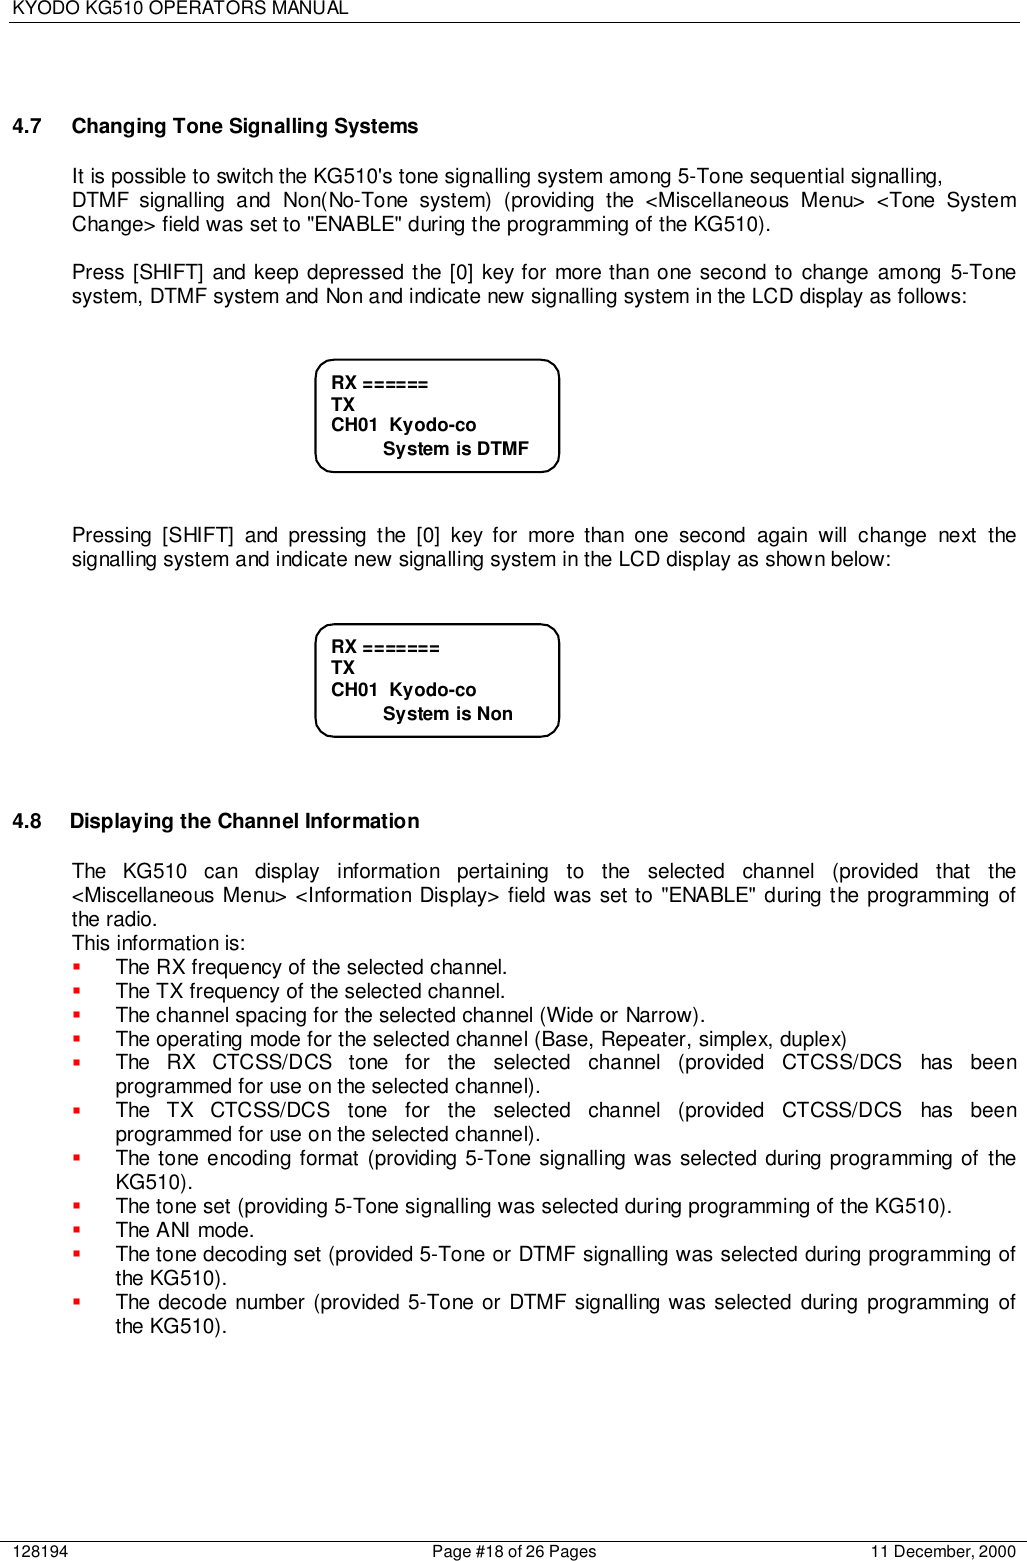 KYODO KG510 OPERATORS MANUAL128194 Page #18 of 26 Pages 11 December, 20004.7 Changing Tone Signalling SystemsIt is possible to switch the KG510&apos;s tone signalling system among 5-Tone sequential signalling,DTMF signalling and Non(No-Tone system) (providing the &lt;Miscellaneous Menu&gt; &lt;Tone SystemChange&gt; field was set to &quot;ENABLE&quot; during the programming of the KG510).Press [SHIFT] and keep depressed the [0] key for more than one second to change among 5-Tonesystem, DTMF system and Non and indicate new signalling system in the LCD display as follows:Pressing [SHIFT] and pressing the [0] key for more than one second again will change next thesignalling system and indicate new signalling system in the LCD display as shown below:4.8  Displaying the Channel InformationThe KG510 can display information pertaining to the selected channel (provided that the&lt;Miscellaneous Menu&gt; &lt;Information Display&gt; field was set to &quot;ENABLE&quot; during the programming ofthe radio.This information is:! The RX frequency of the selected channel.! The TX frequency of the selected channel.! The channel spacing for the selected channel (Wide or Narrow).! The operating mode for the selected channel (Base, Repeater, simplex, duplex)! The RX CTCSS/DCS tone for the selected channel (provided CTCSS/DCS has beenprogrammed for use on the selected channel).! The TX CTCSS/DCS tone for the selected channel (provided CTCSS/DCS has beenprogrammed for use on the selected channel).! The tone encoding format (providing 5-Tone signalling was selected during programming of theKG510).! The tone set (providing 5-Tone signalling was selected during programming of the KG510).! The ANI mode.! The tone decoding set (provided 5-Tone or DTMF signalling was selected during programming ofthe KG510).! The decode number (provided 5-Tone or DTMF signalling was selected during programming ofthe KG510).RX =======TXCH01  Kyodo-co          System is NonRX ======TXCH01  Kyodo-co          System is DTMF